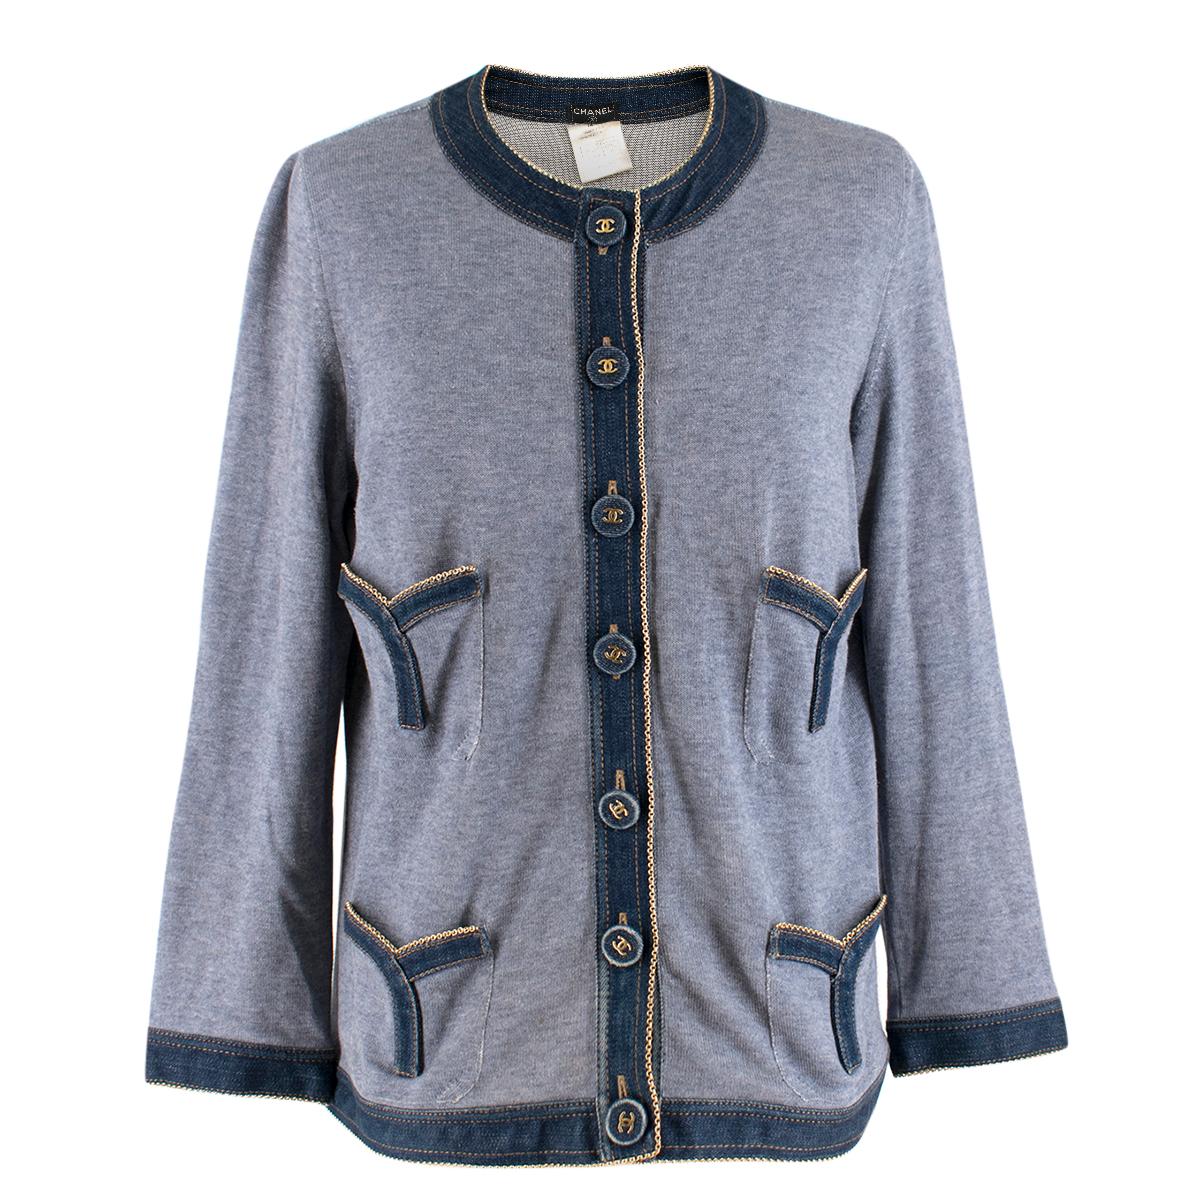 Chanel denim-trimmed cardigan

- Blue, mid-weight cotton, silk and cashmere-blend knit 
- Round neck, long sleeves 
- Blue denim trimmed neckline, placket, cuff and hem, gold-tone chain edges 
- Denim-covered buttons, logo plaque 
- 80% cotton, 10%